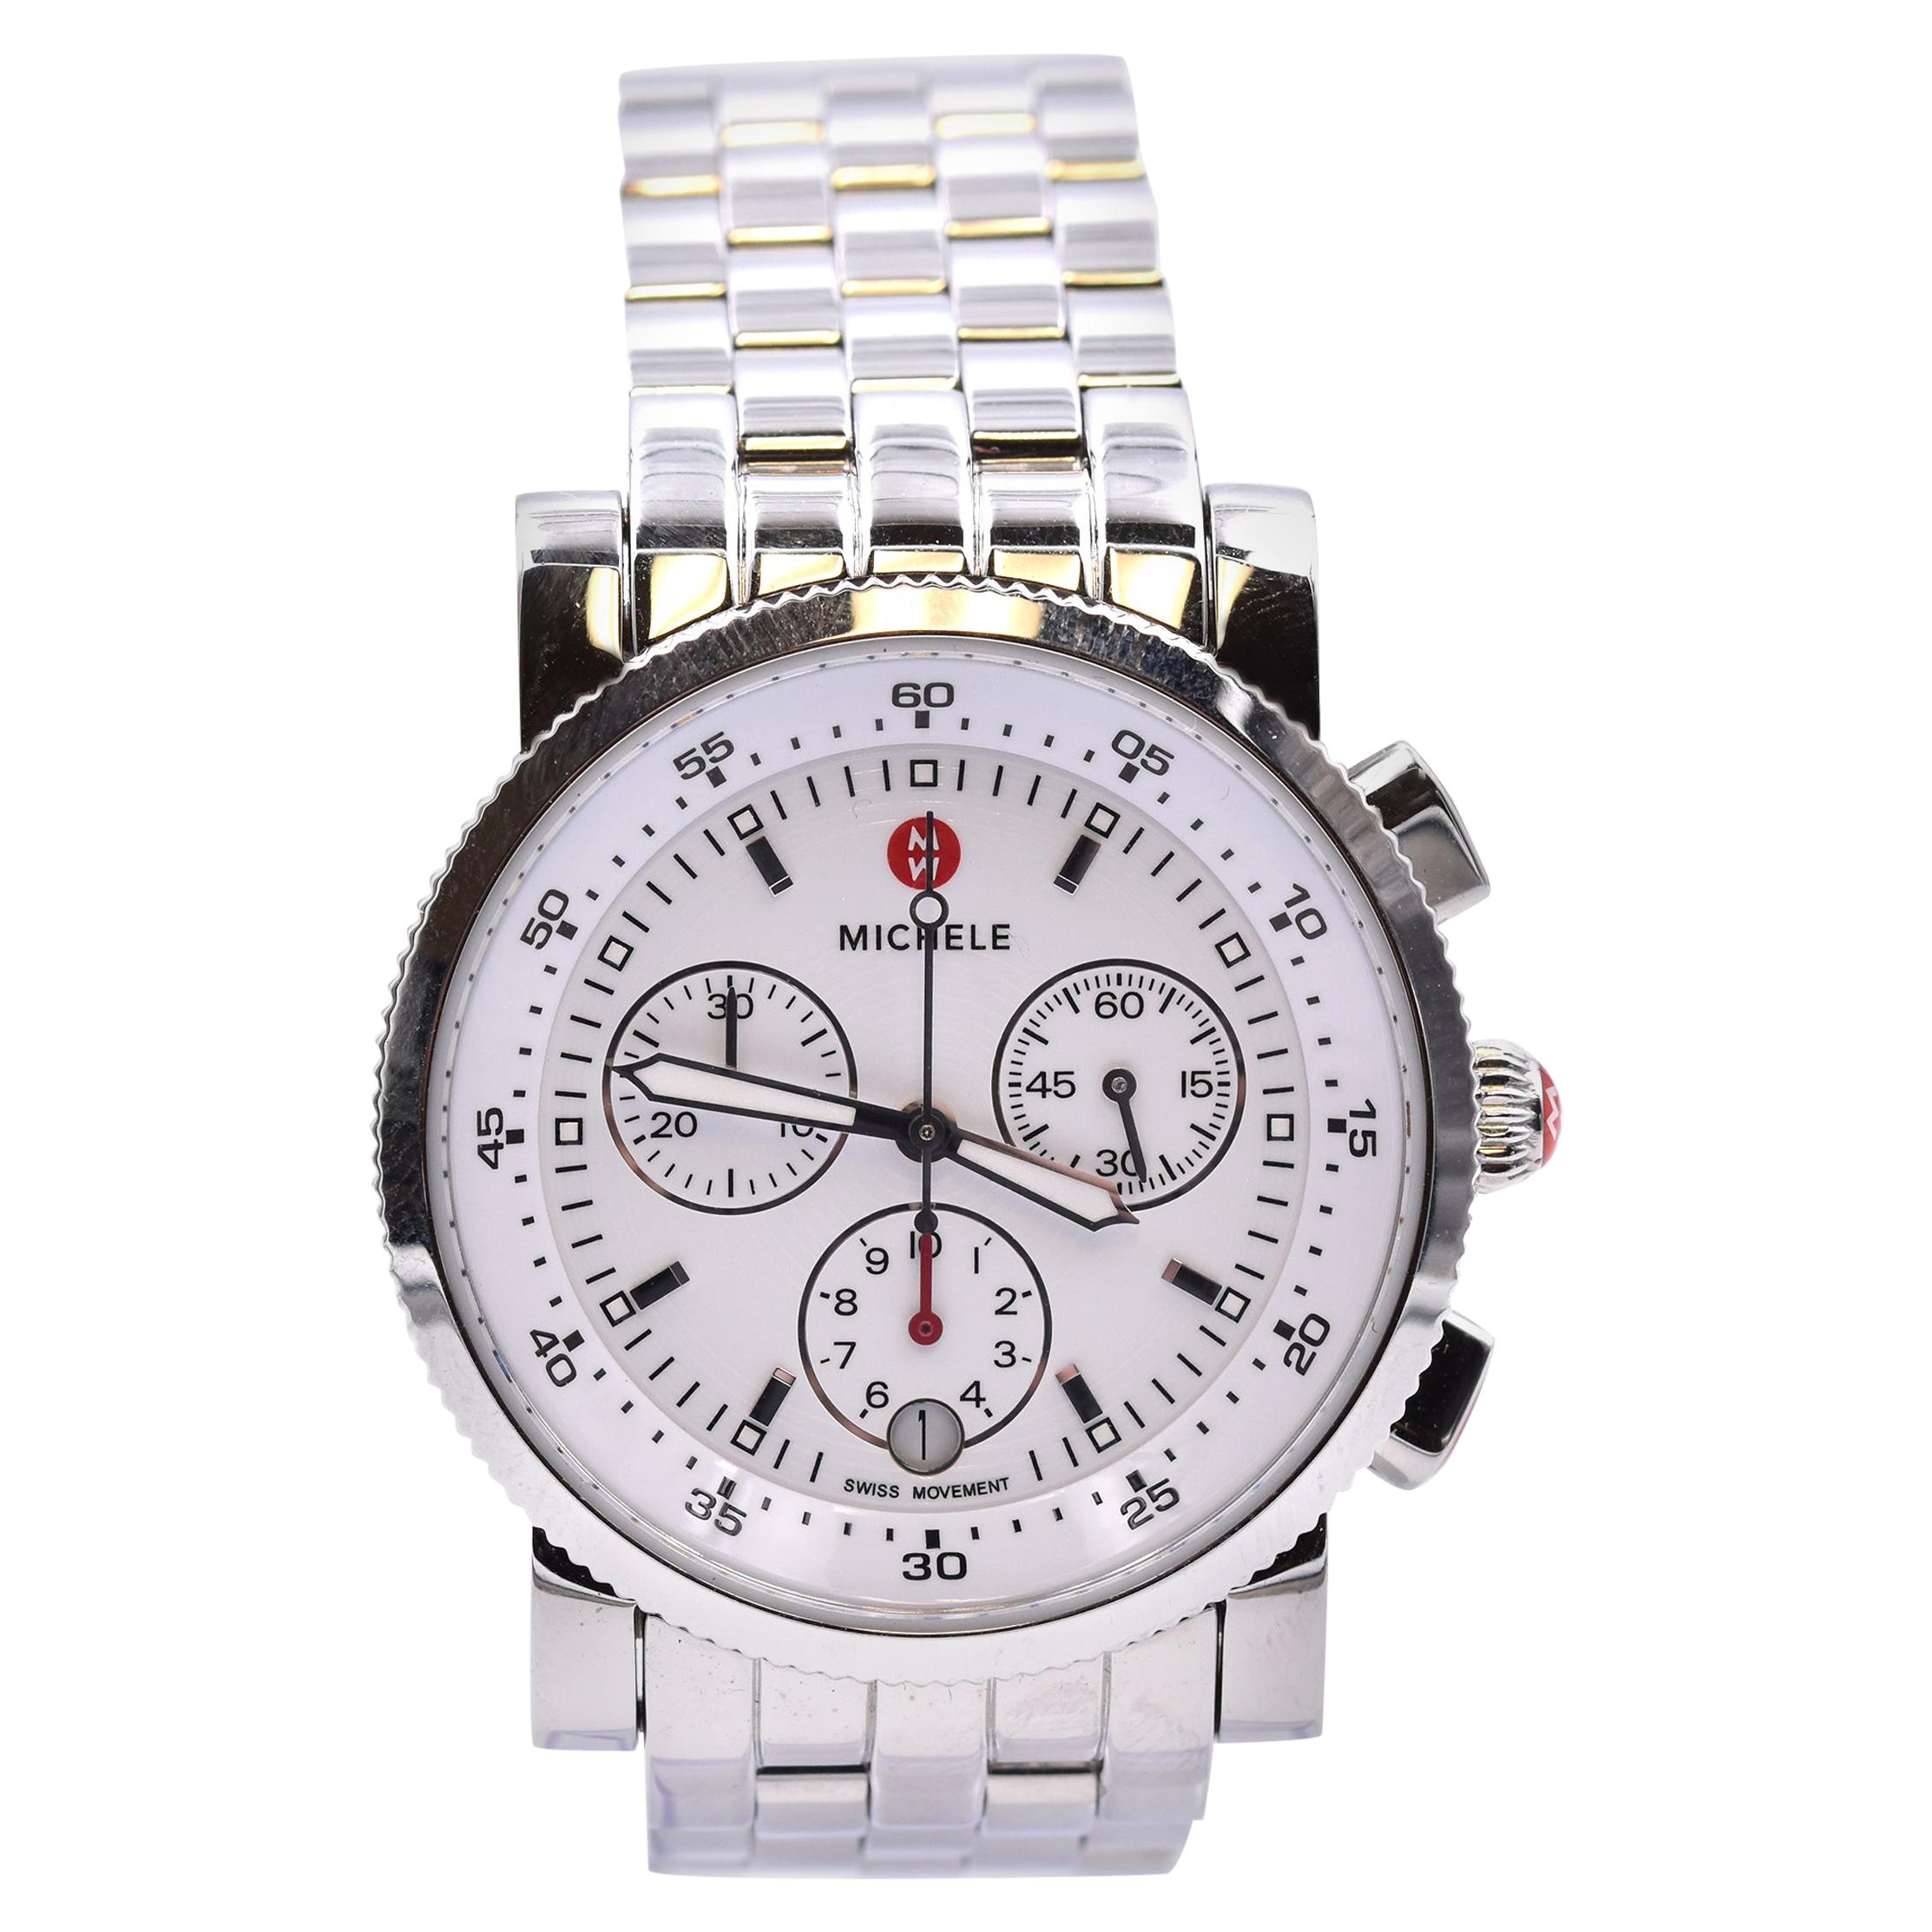 Michele Stainless Steel Sport Sail